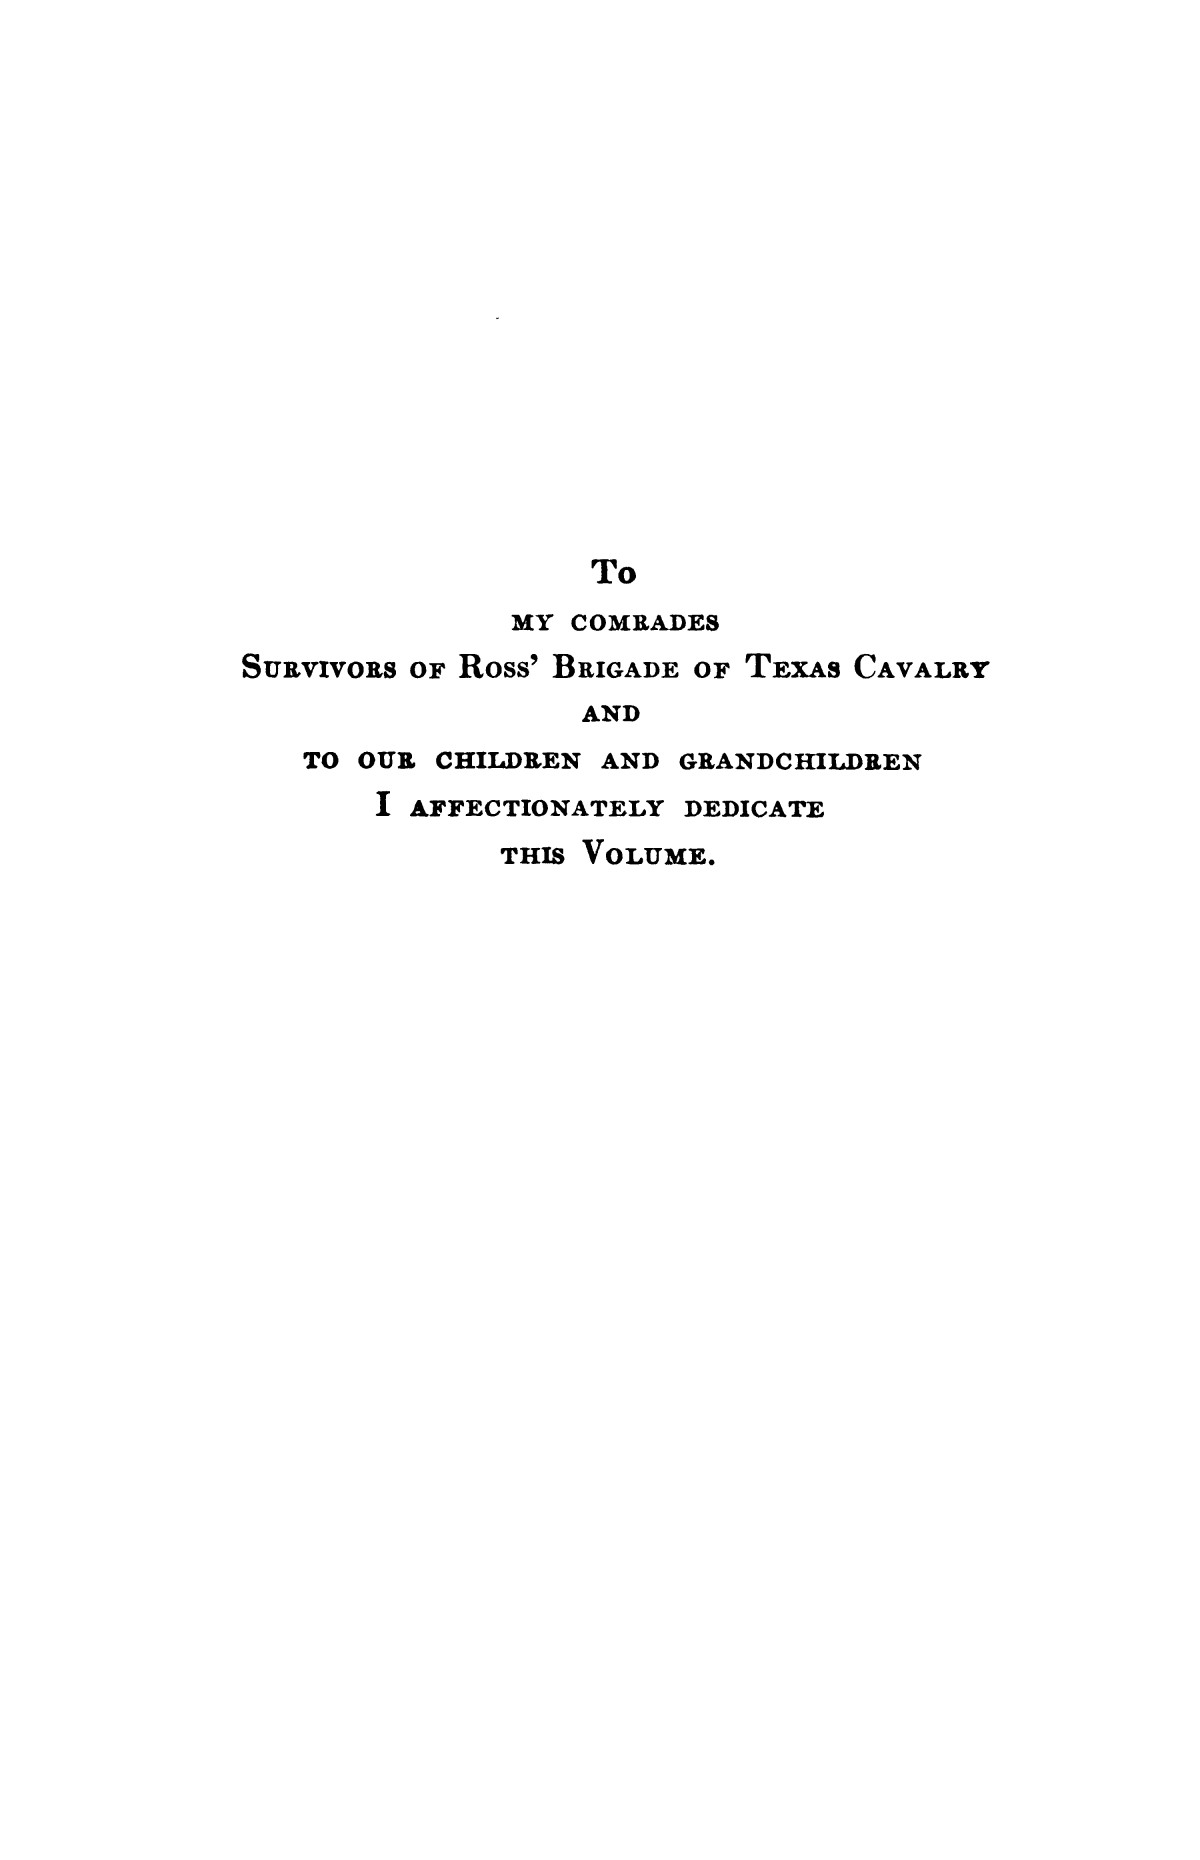 The Lone Star defenders; a chronicle of the Third Texas cavalry, Ross brigade
                                                
                                                    [Sequence #]: 7 of 306
                                                